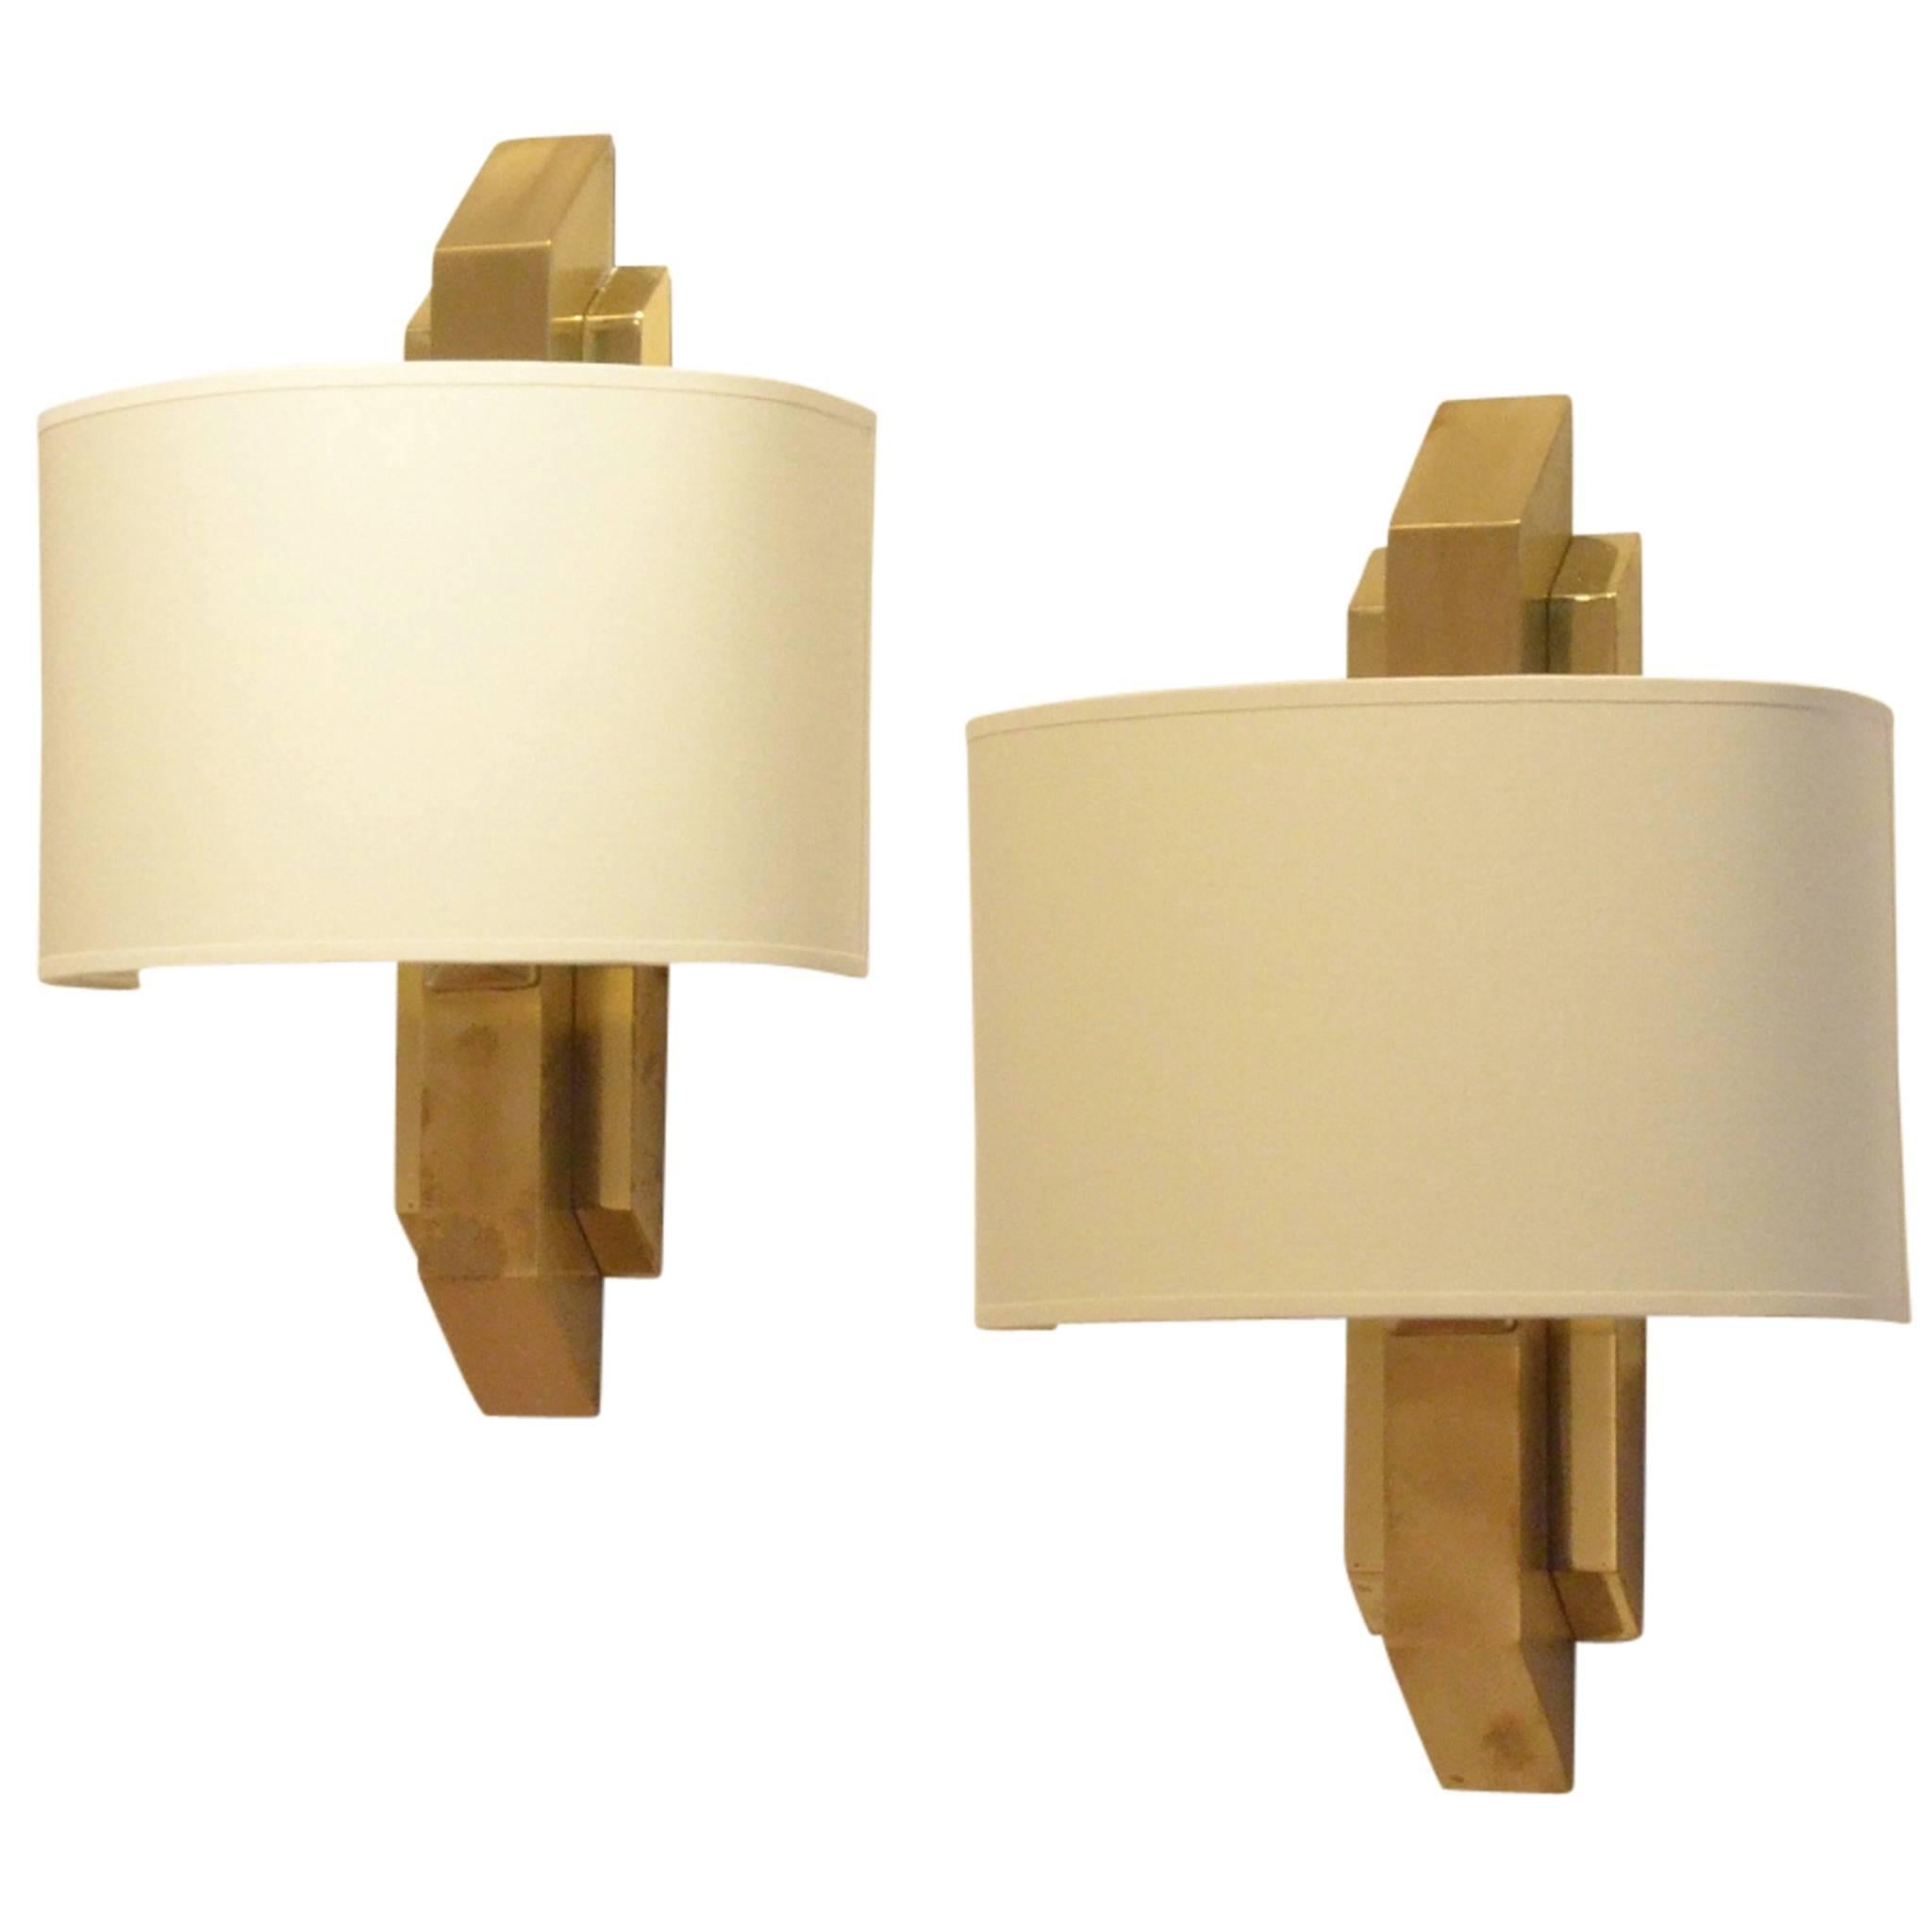 Pair of German Vintage Design Geometrical Brass and Textile Wall Sconces Lamps